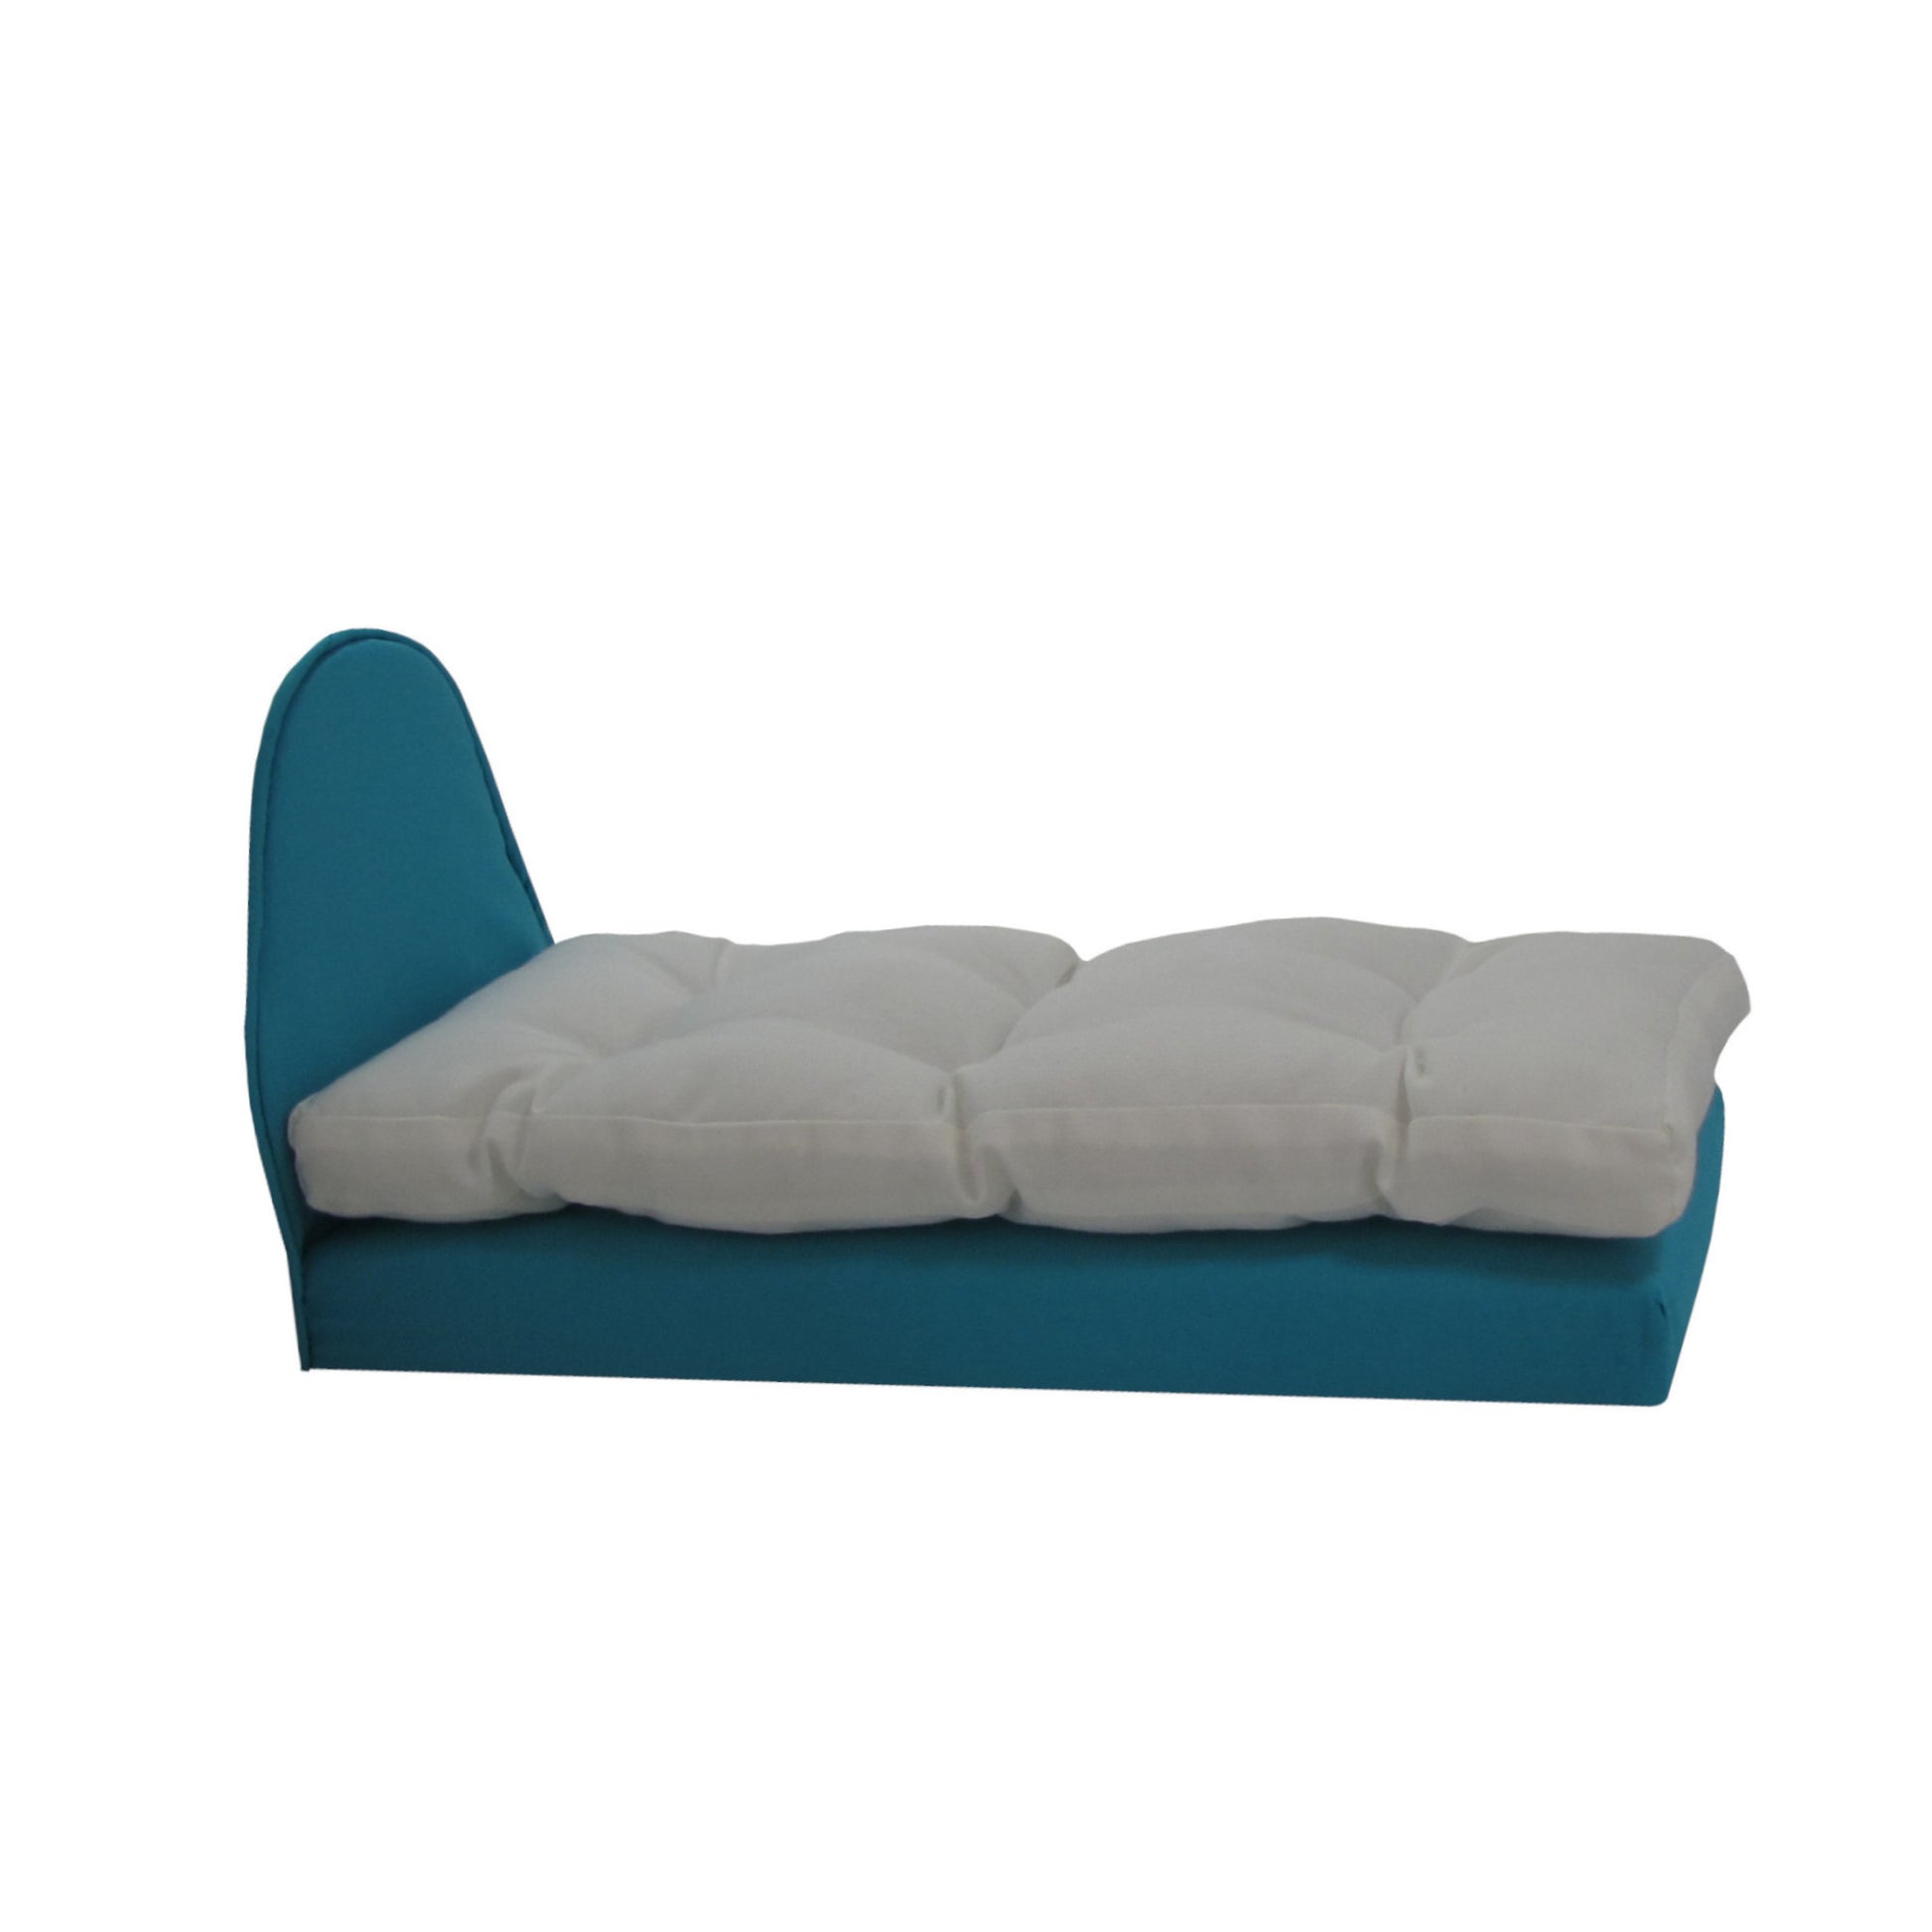 Upholstered Turquoise Doll Bed for 11 1/2-inch and 12-inch dolls